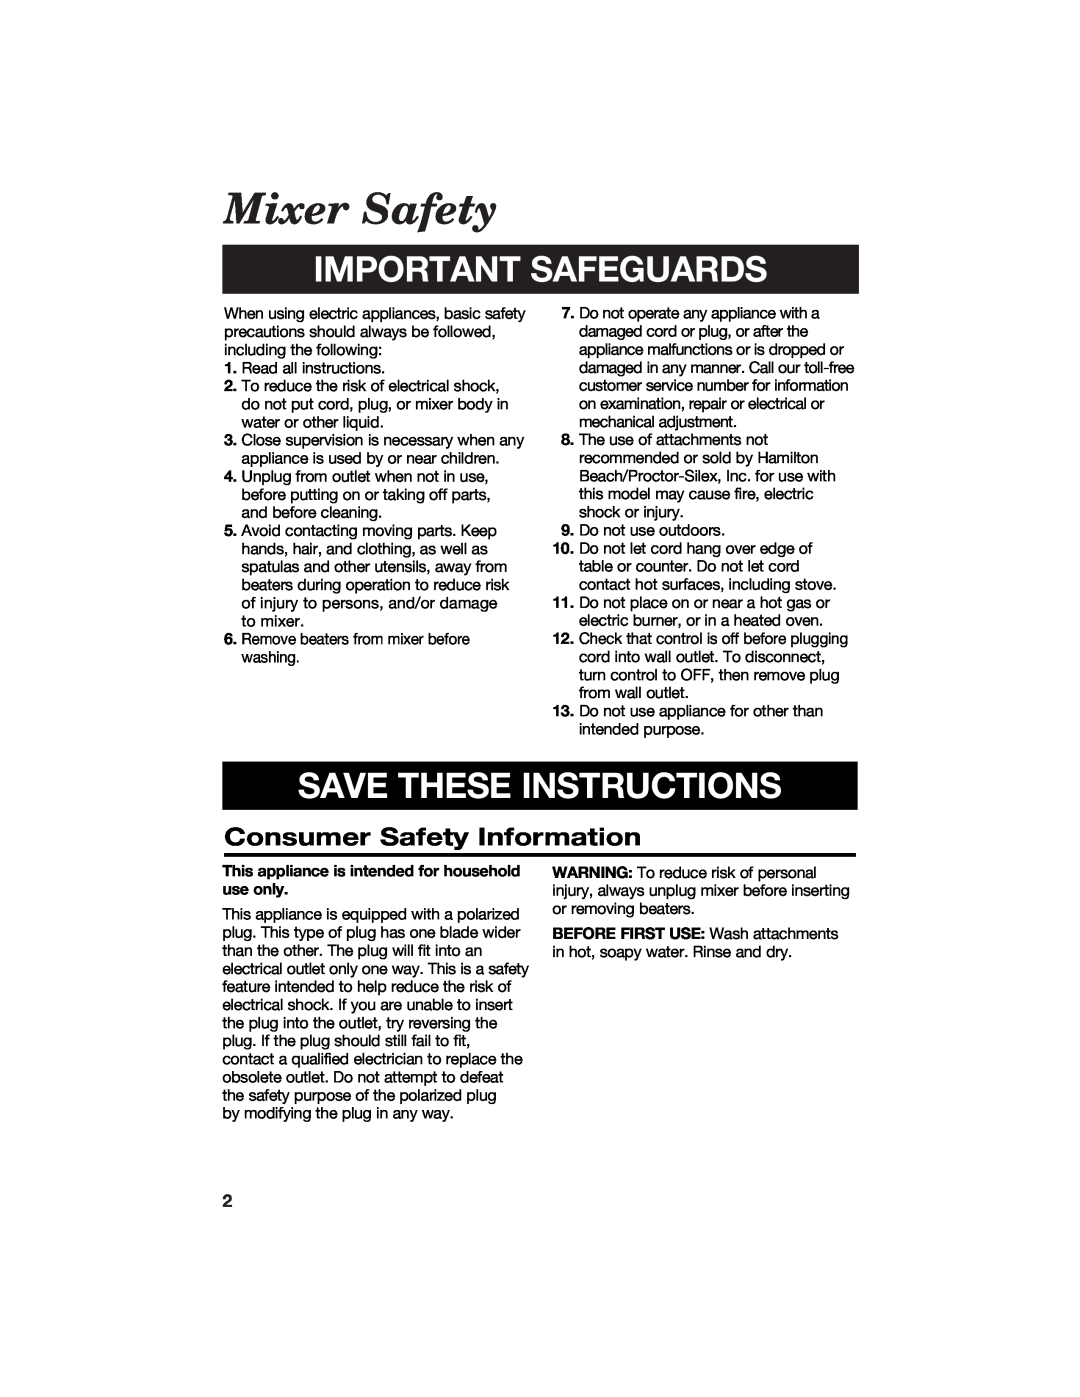 Hamilton Beach 62515 manual Mixer Safety, Consumer Safety Information, Important Safeguards, Save These Instructions 